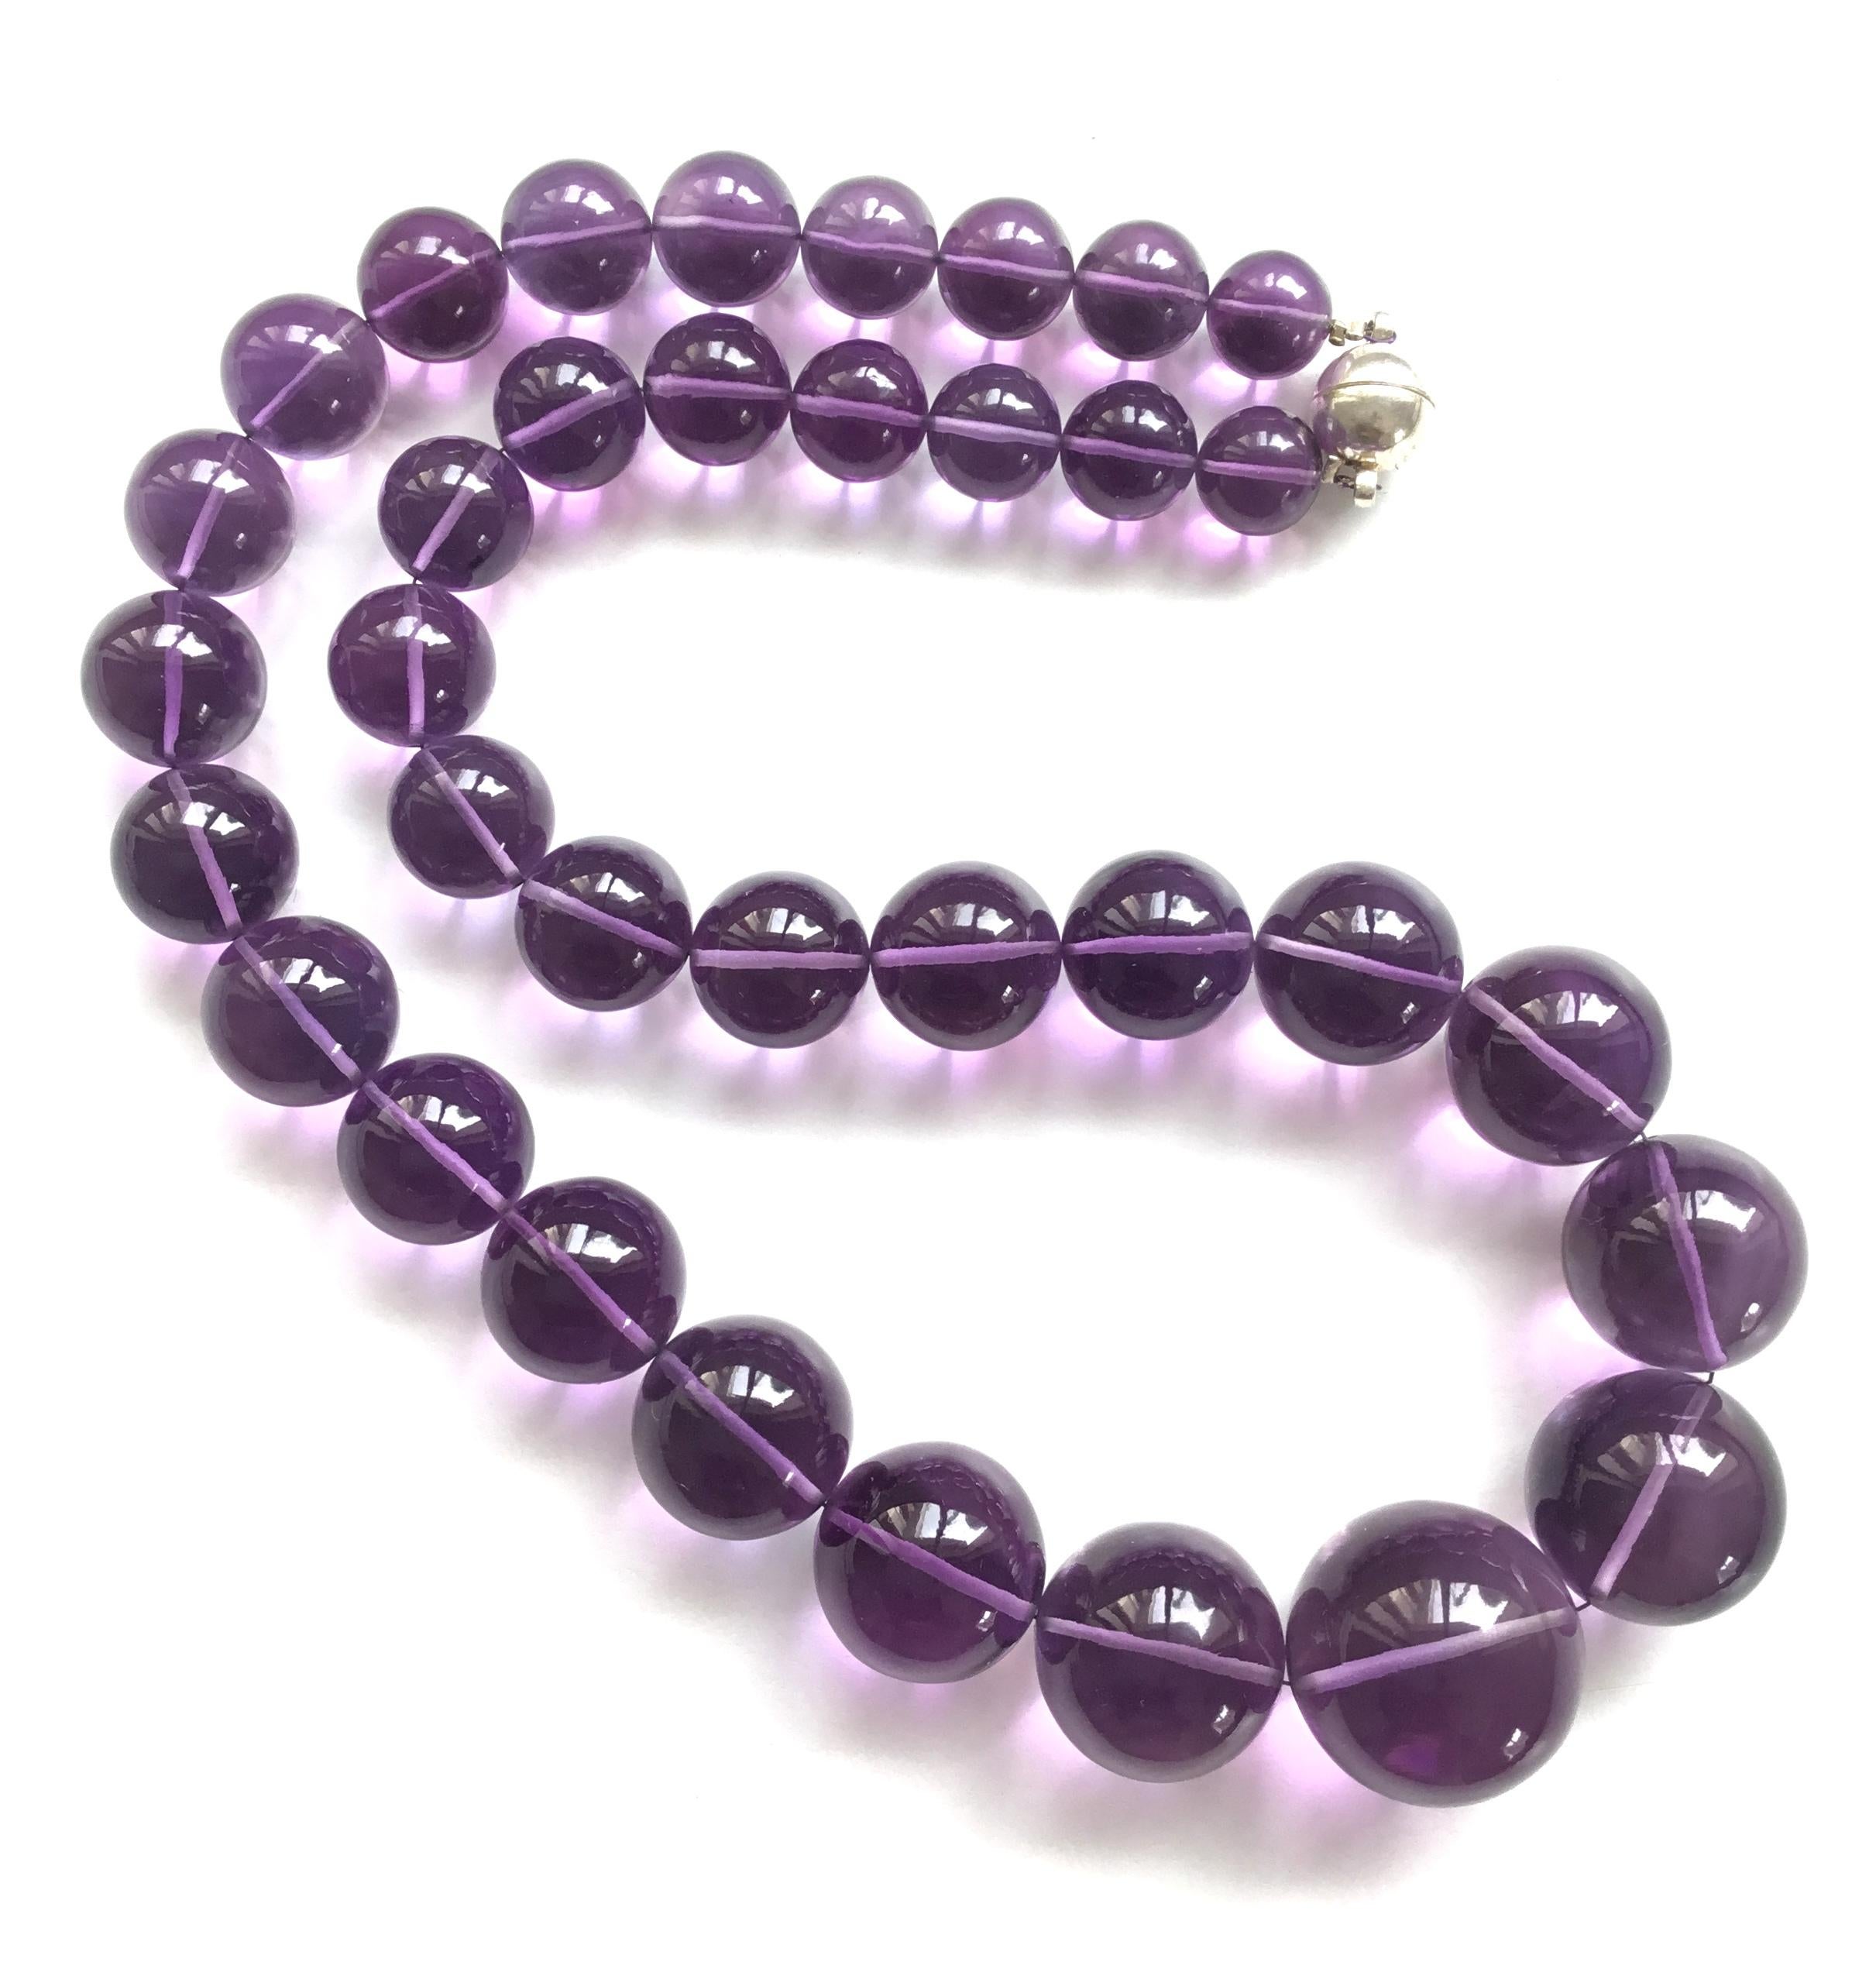 Women's or Men's Top Quality Amethyst Balls Necklace Loupe Clean For Sale